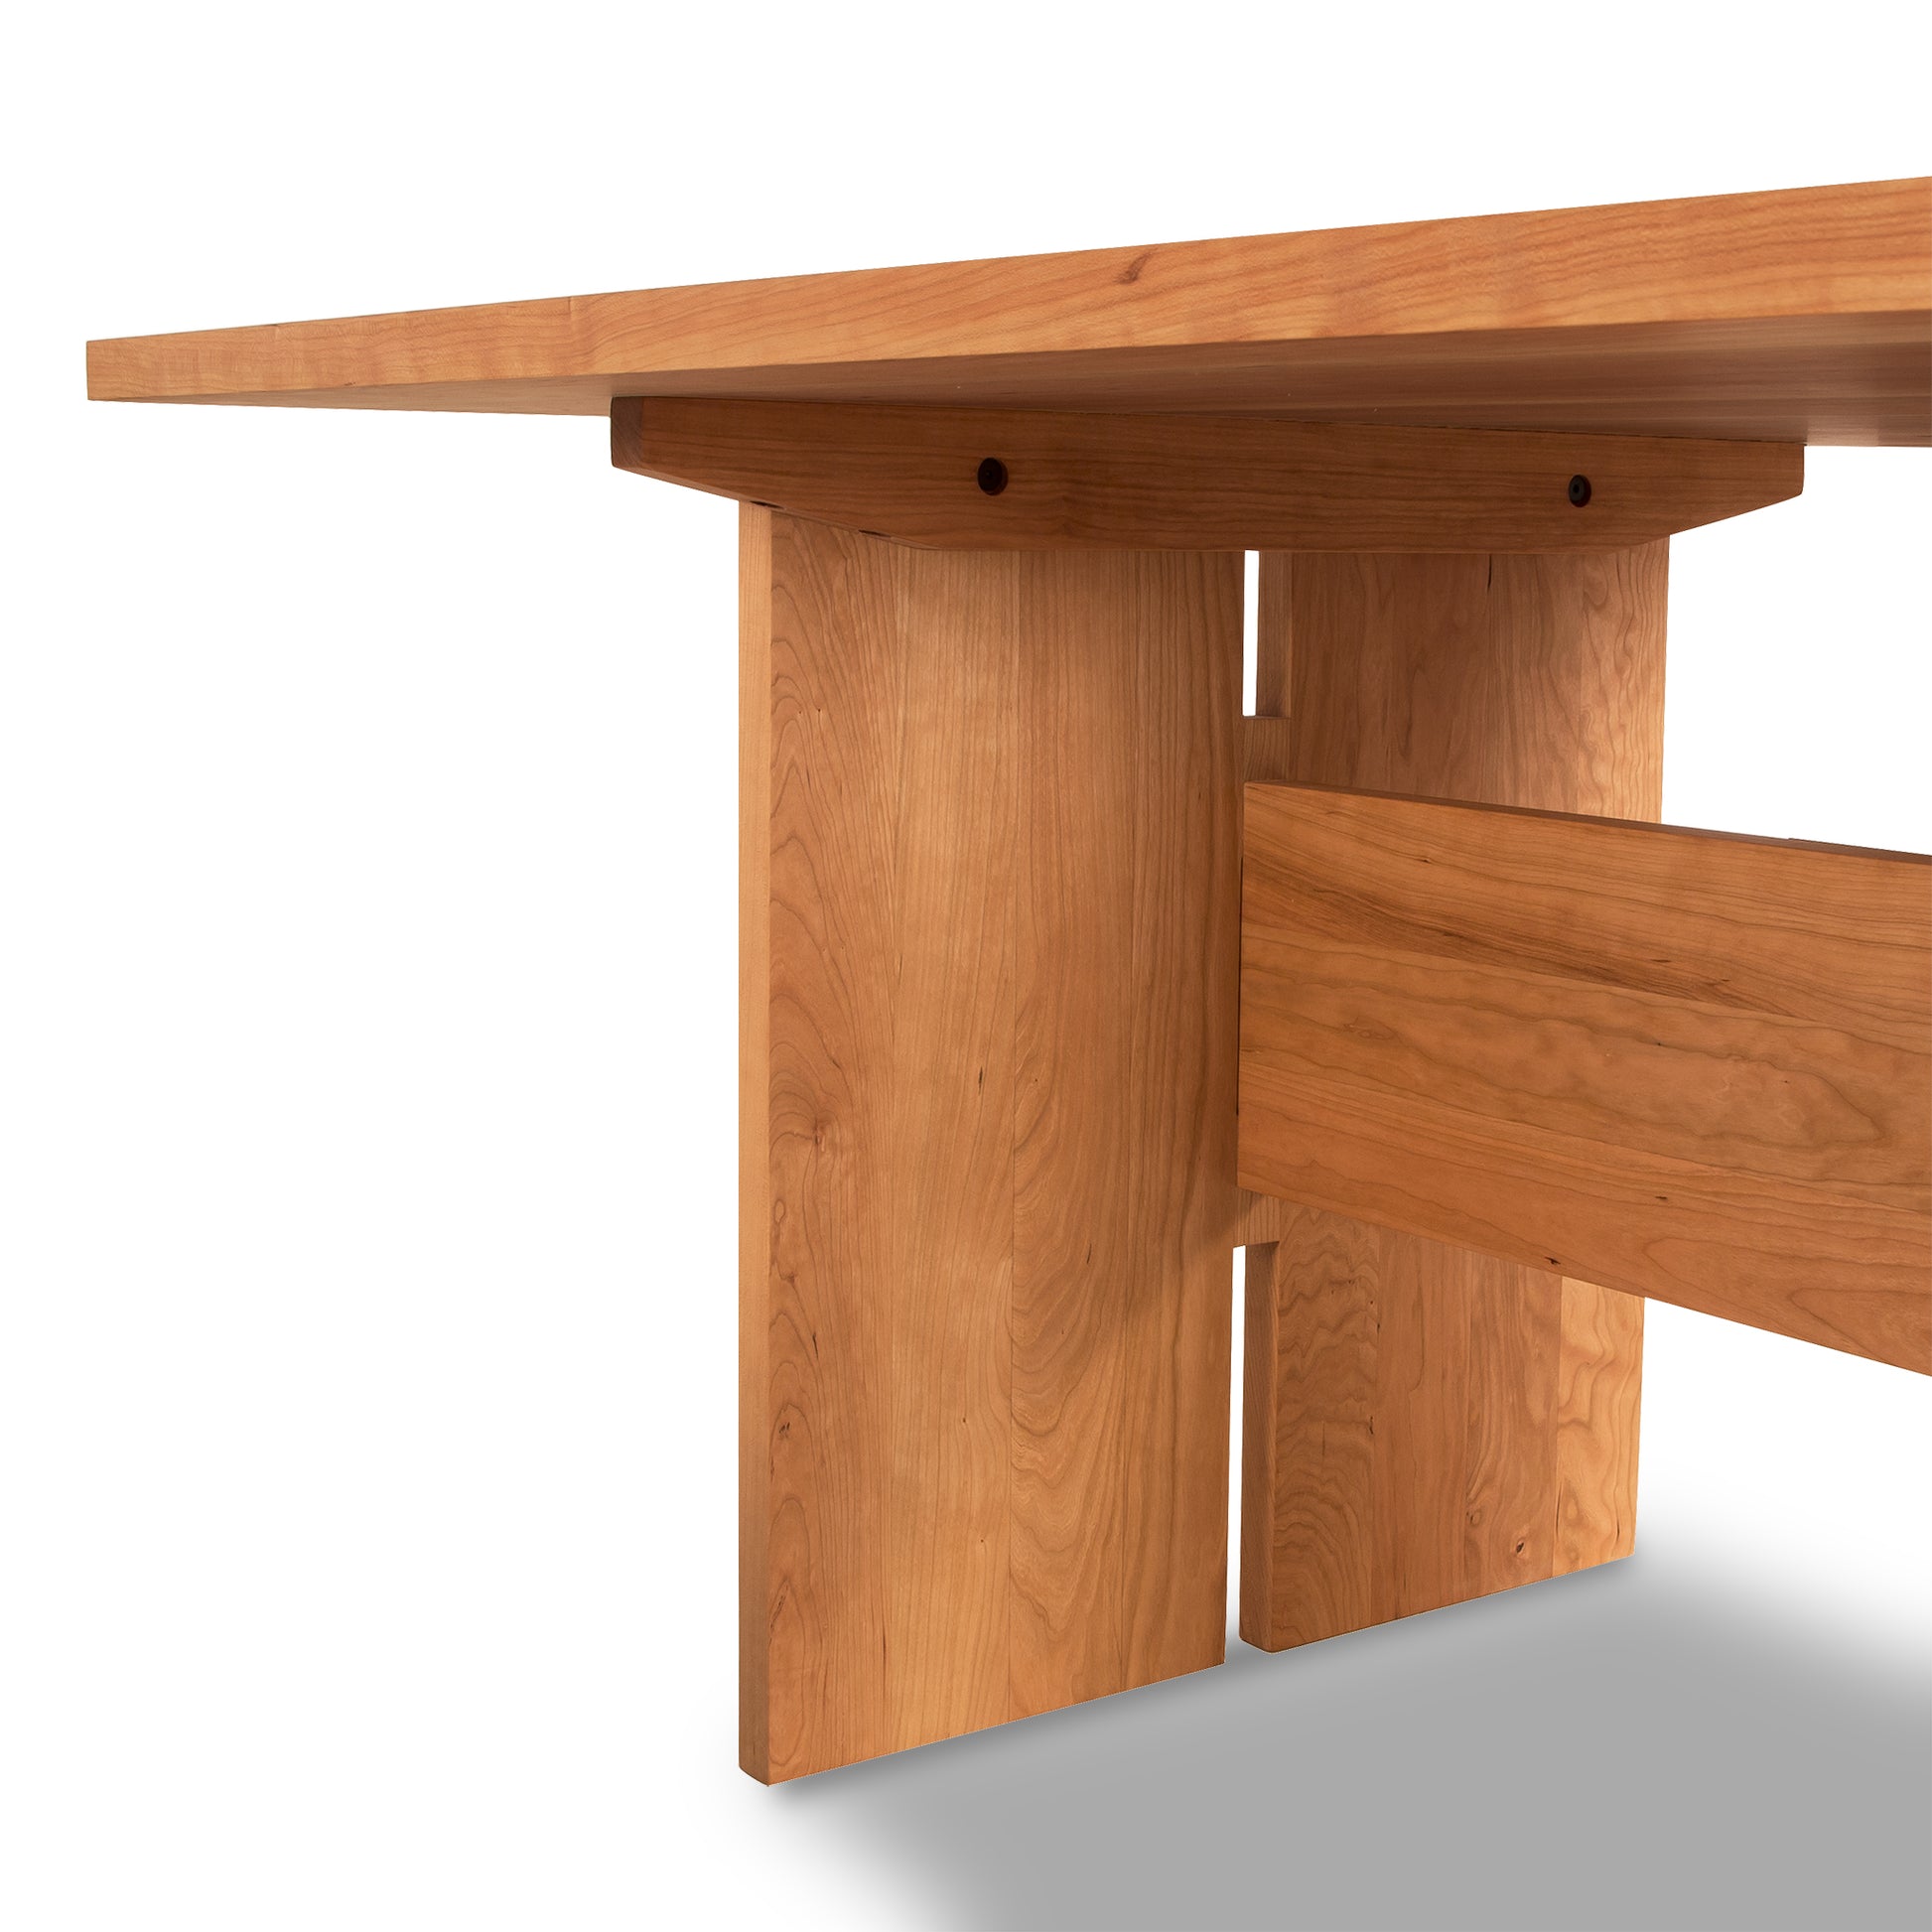 An image of a Modern American Dining Table from Vermont Furniture Designs with two legs from the Modern American Furniture Collection.